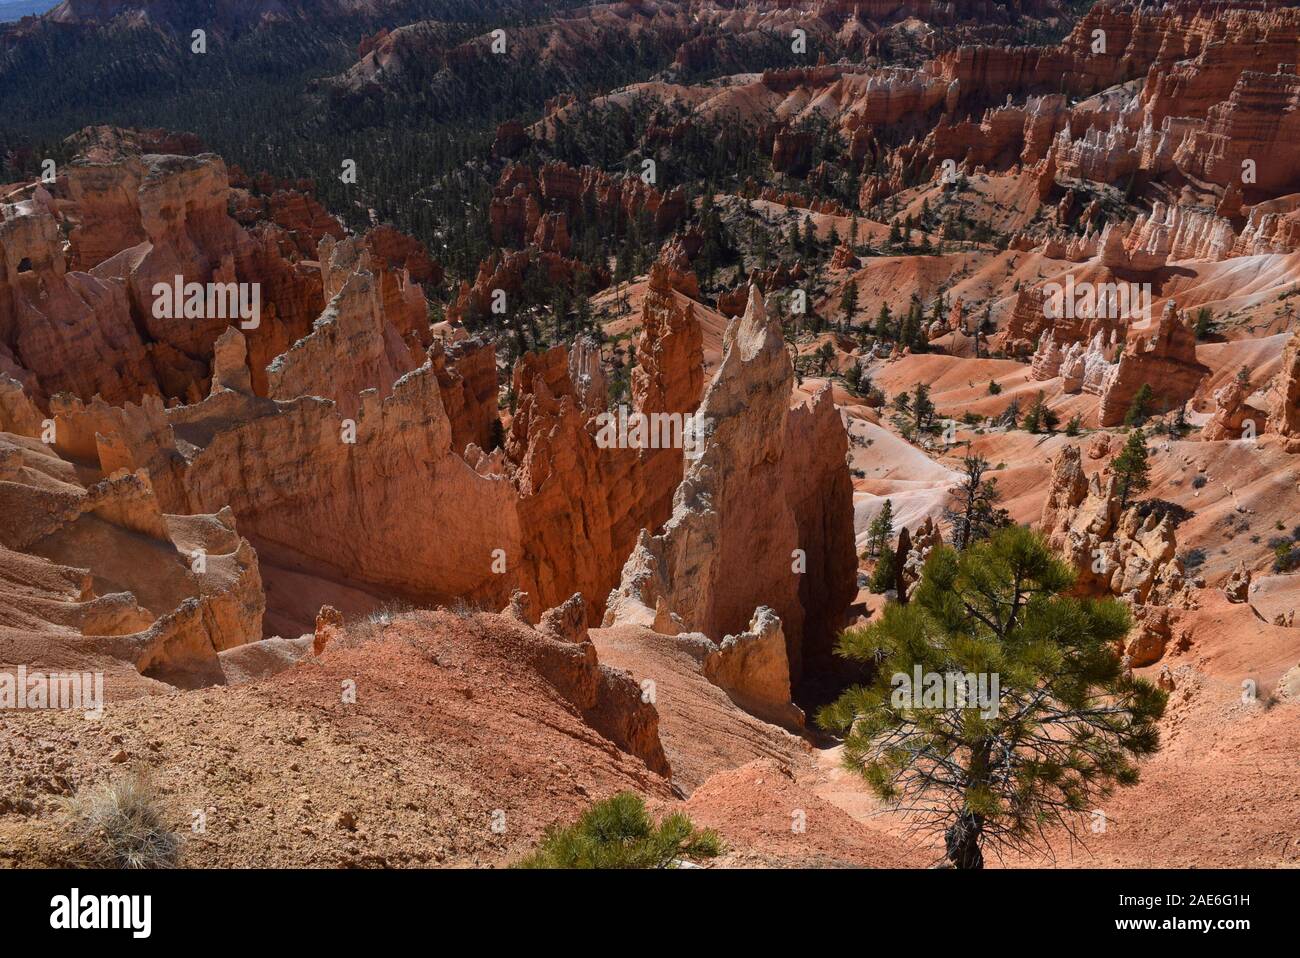 Hoodoos at the Bryce Canyon amphitheater; the result of millions of years of erosion.  Taken from the Queen's Garden trail. Stock Photo